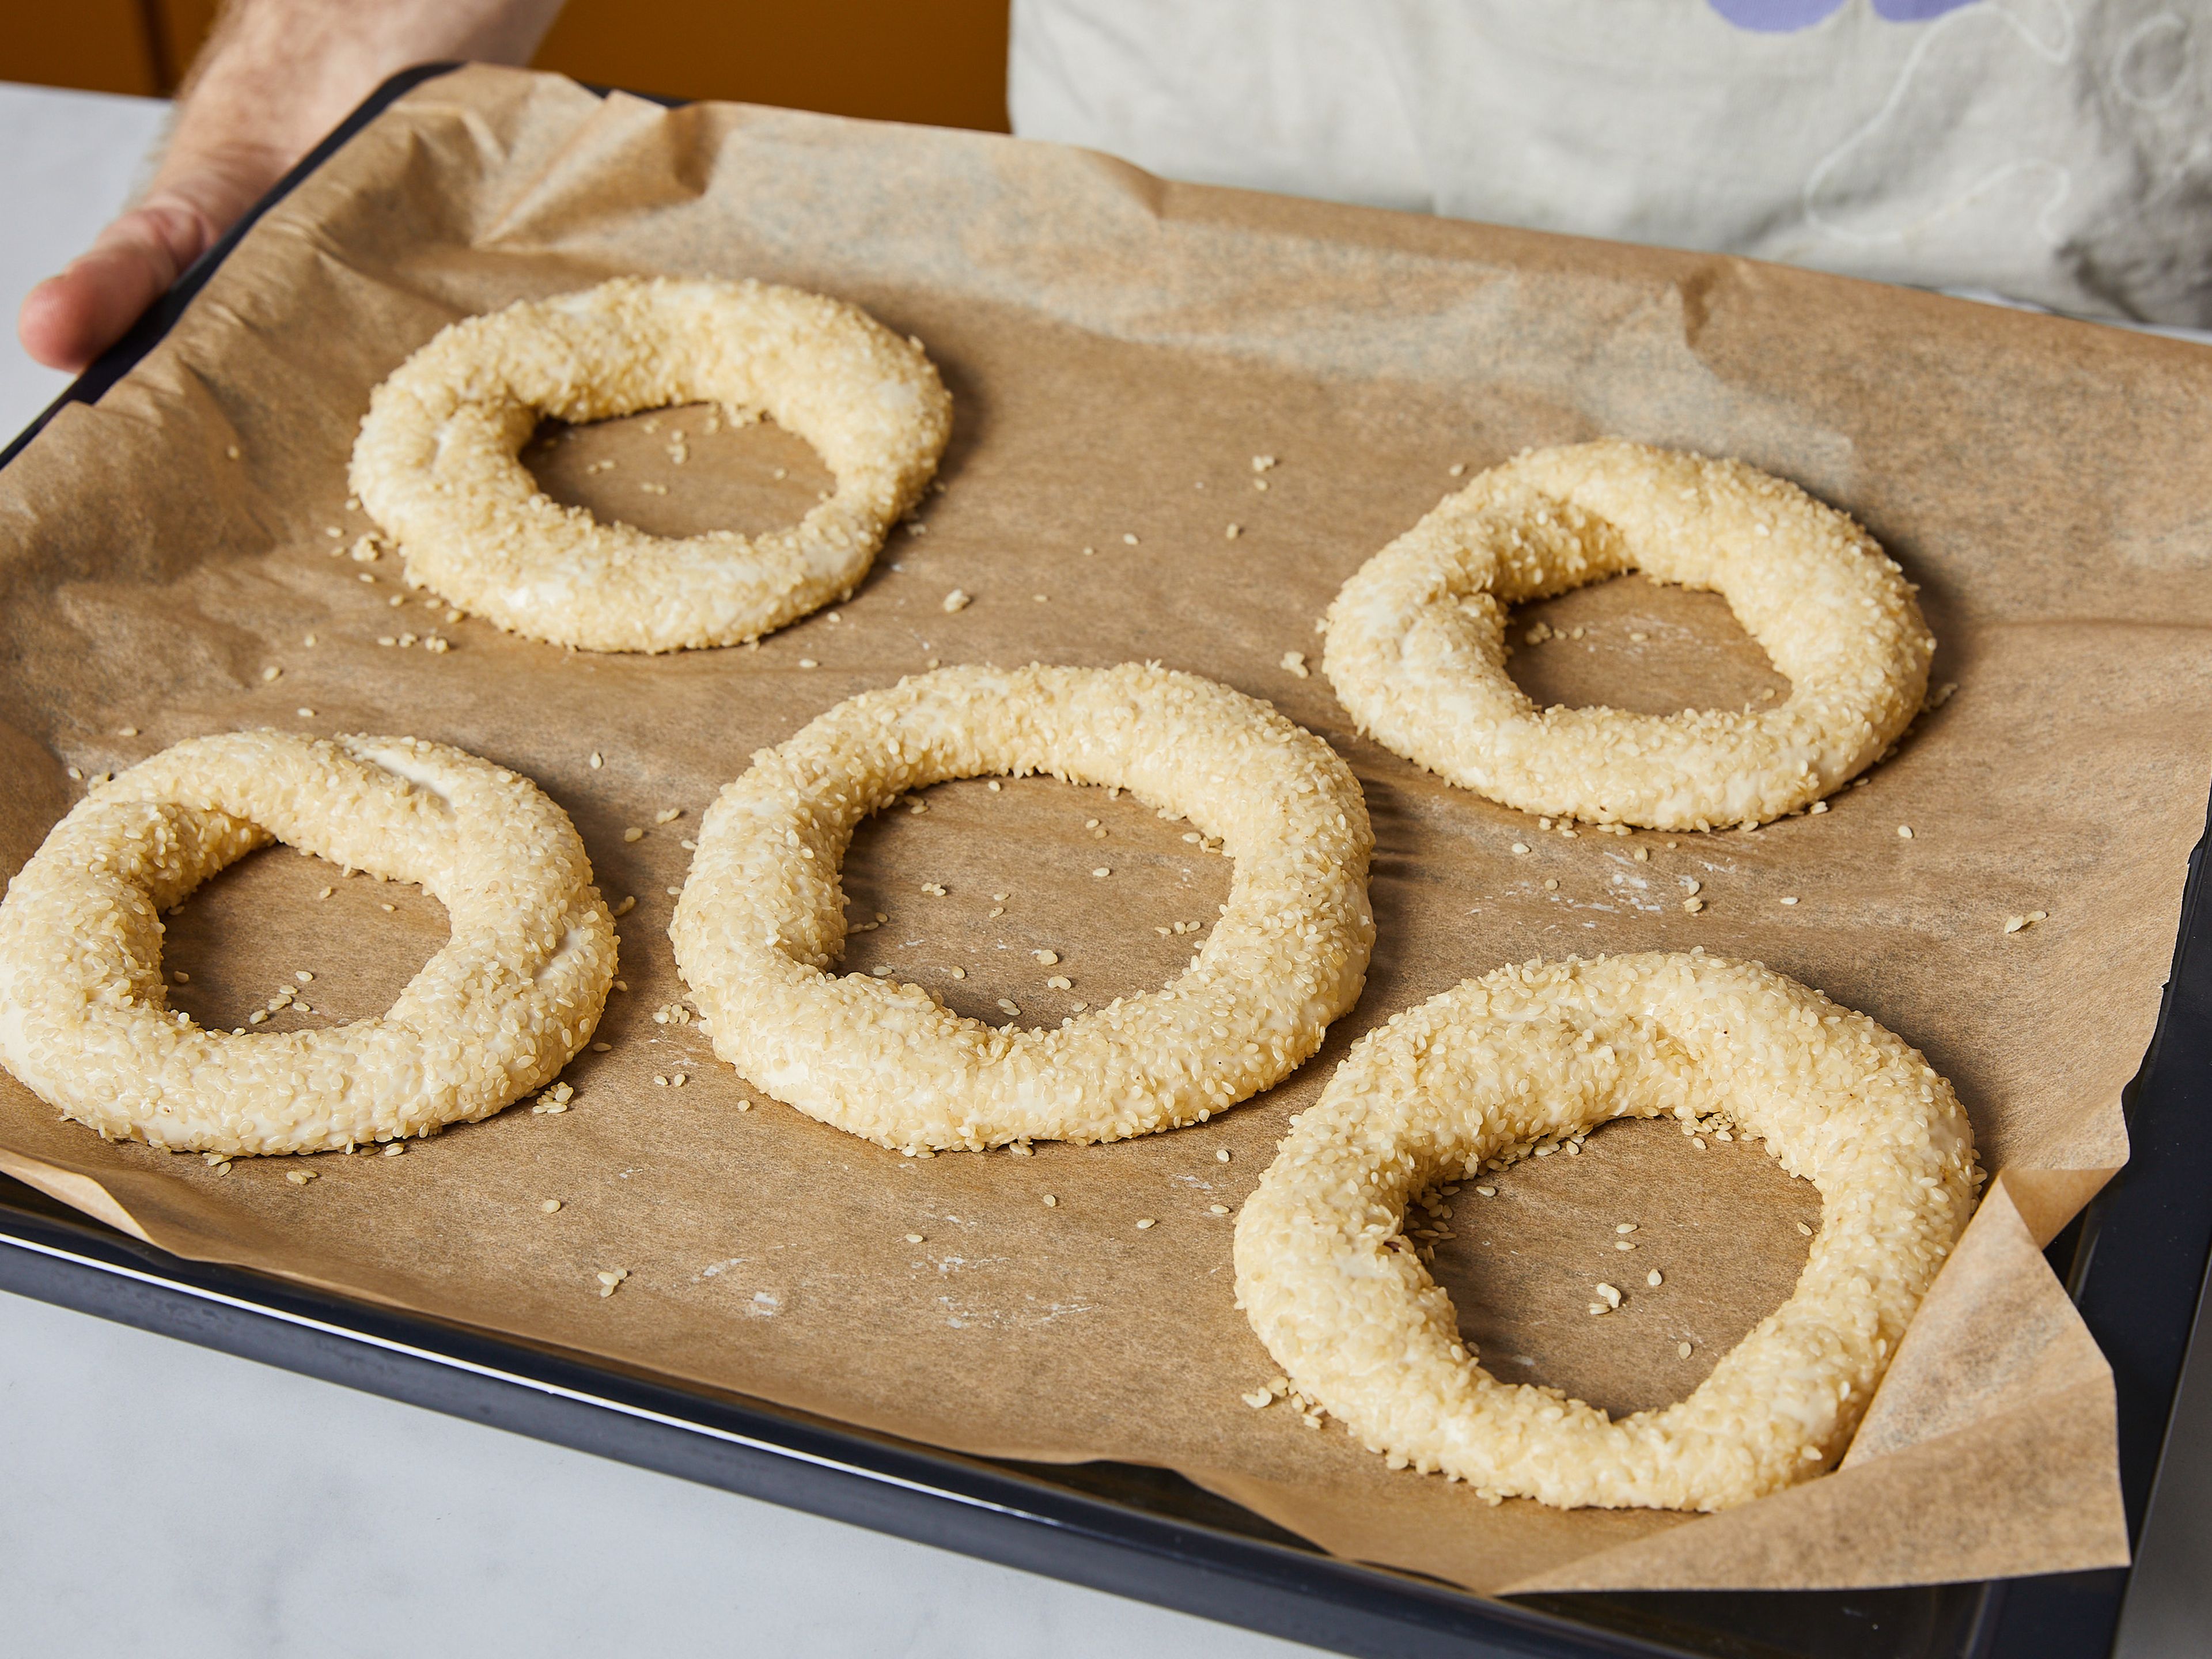 Add the simit to the oven and immediately reduce temperature to 230°C/440°F. Bake for a total of 20-25 min., rotating the sheets halfway through. Remove from oven and serve warm with cream cheese, butter or plain.